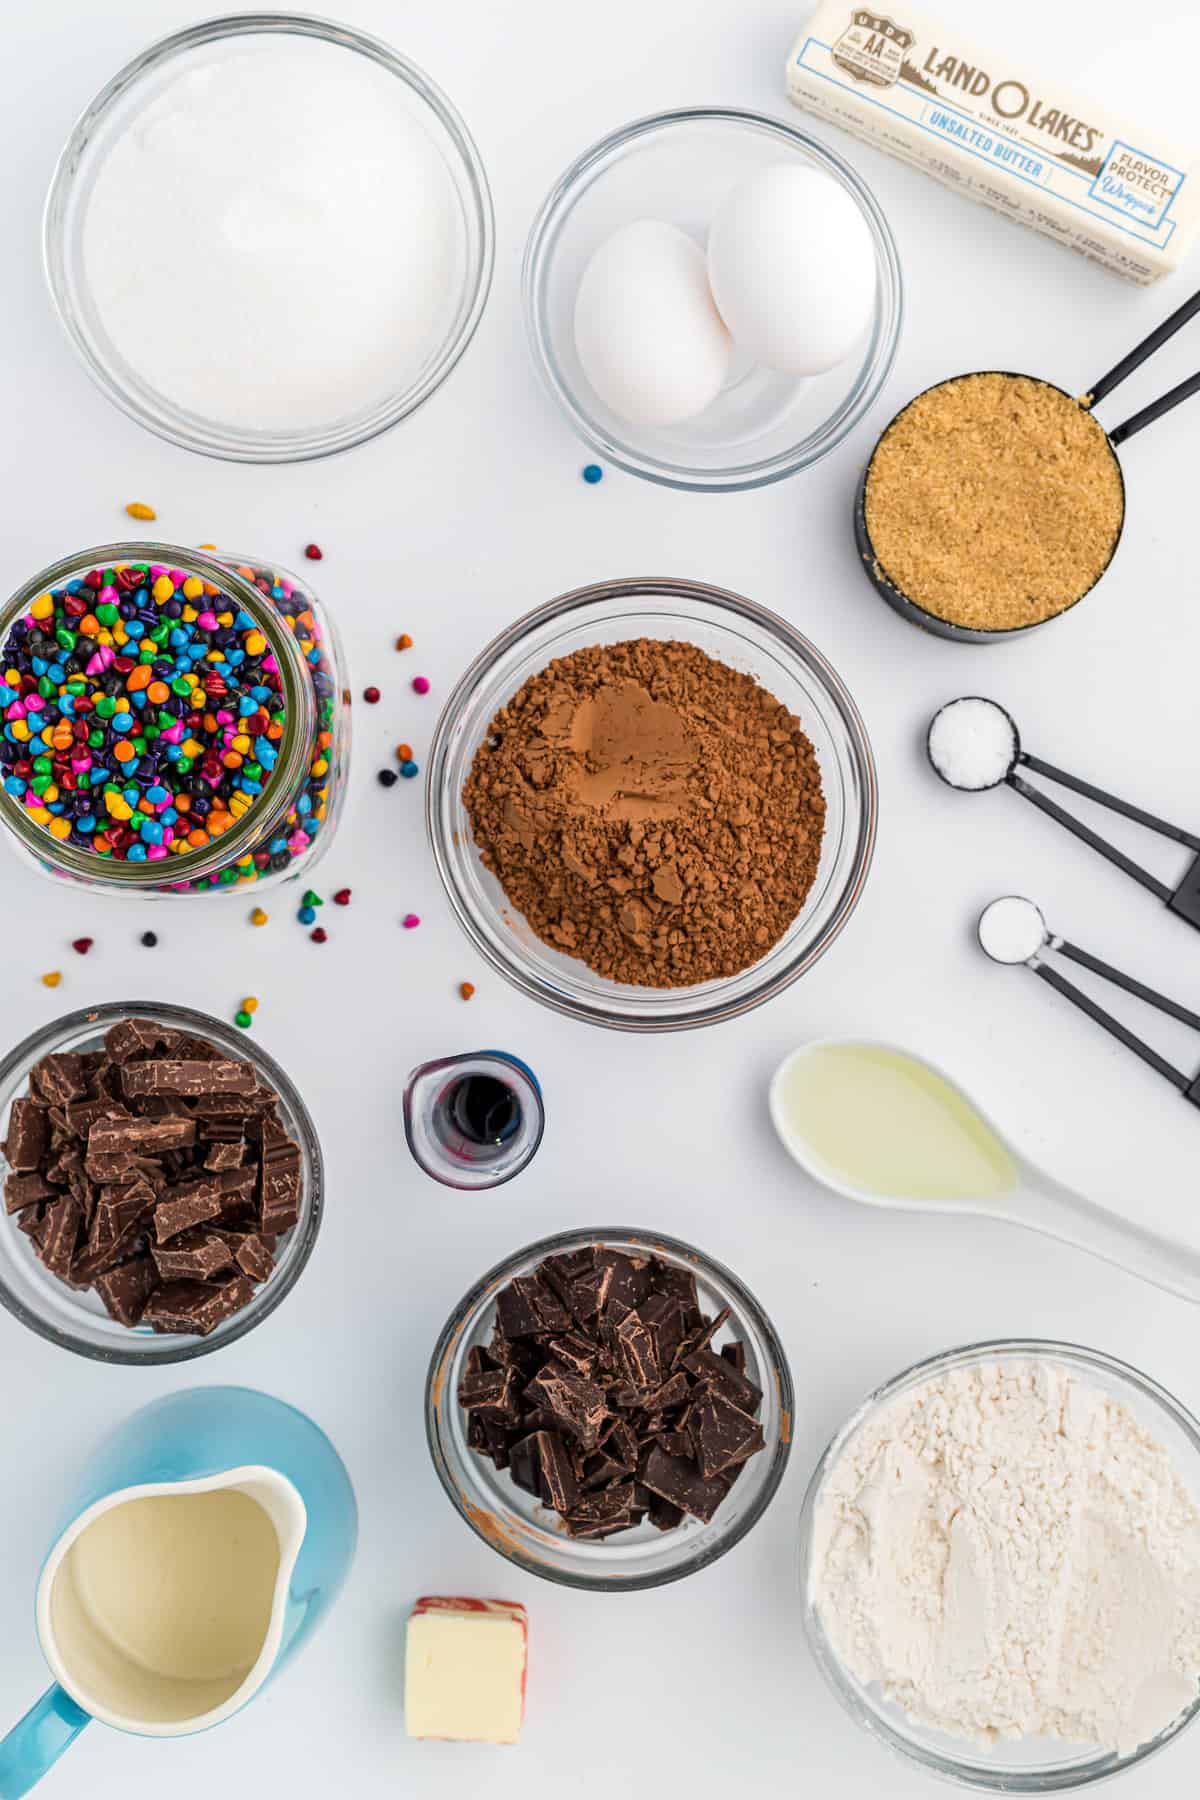 Clear bowls filled with baking ingredients like cocoa powder, sugar and rainbow sprinkles